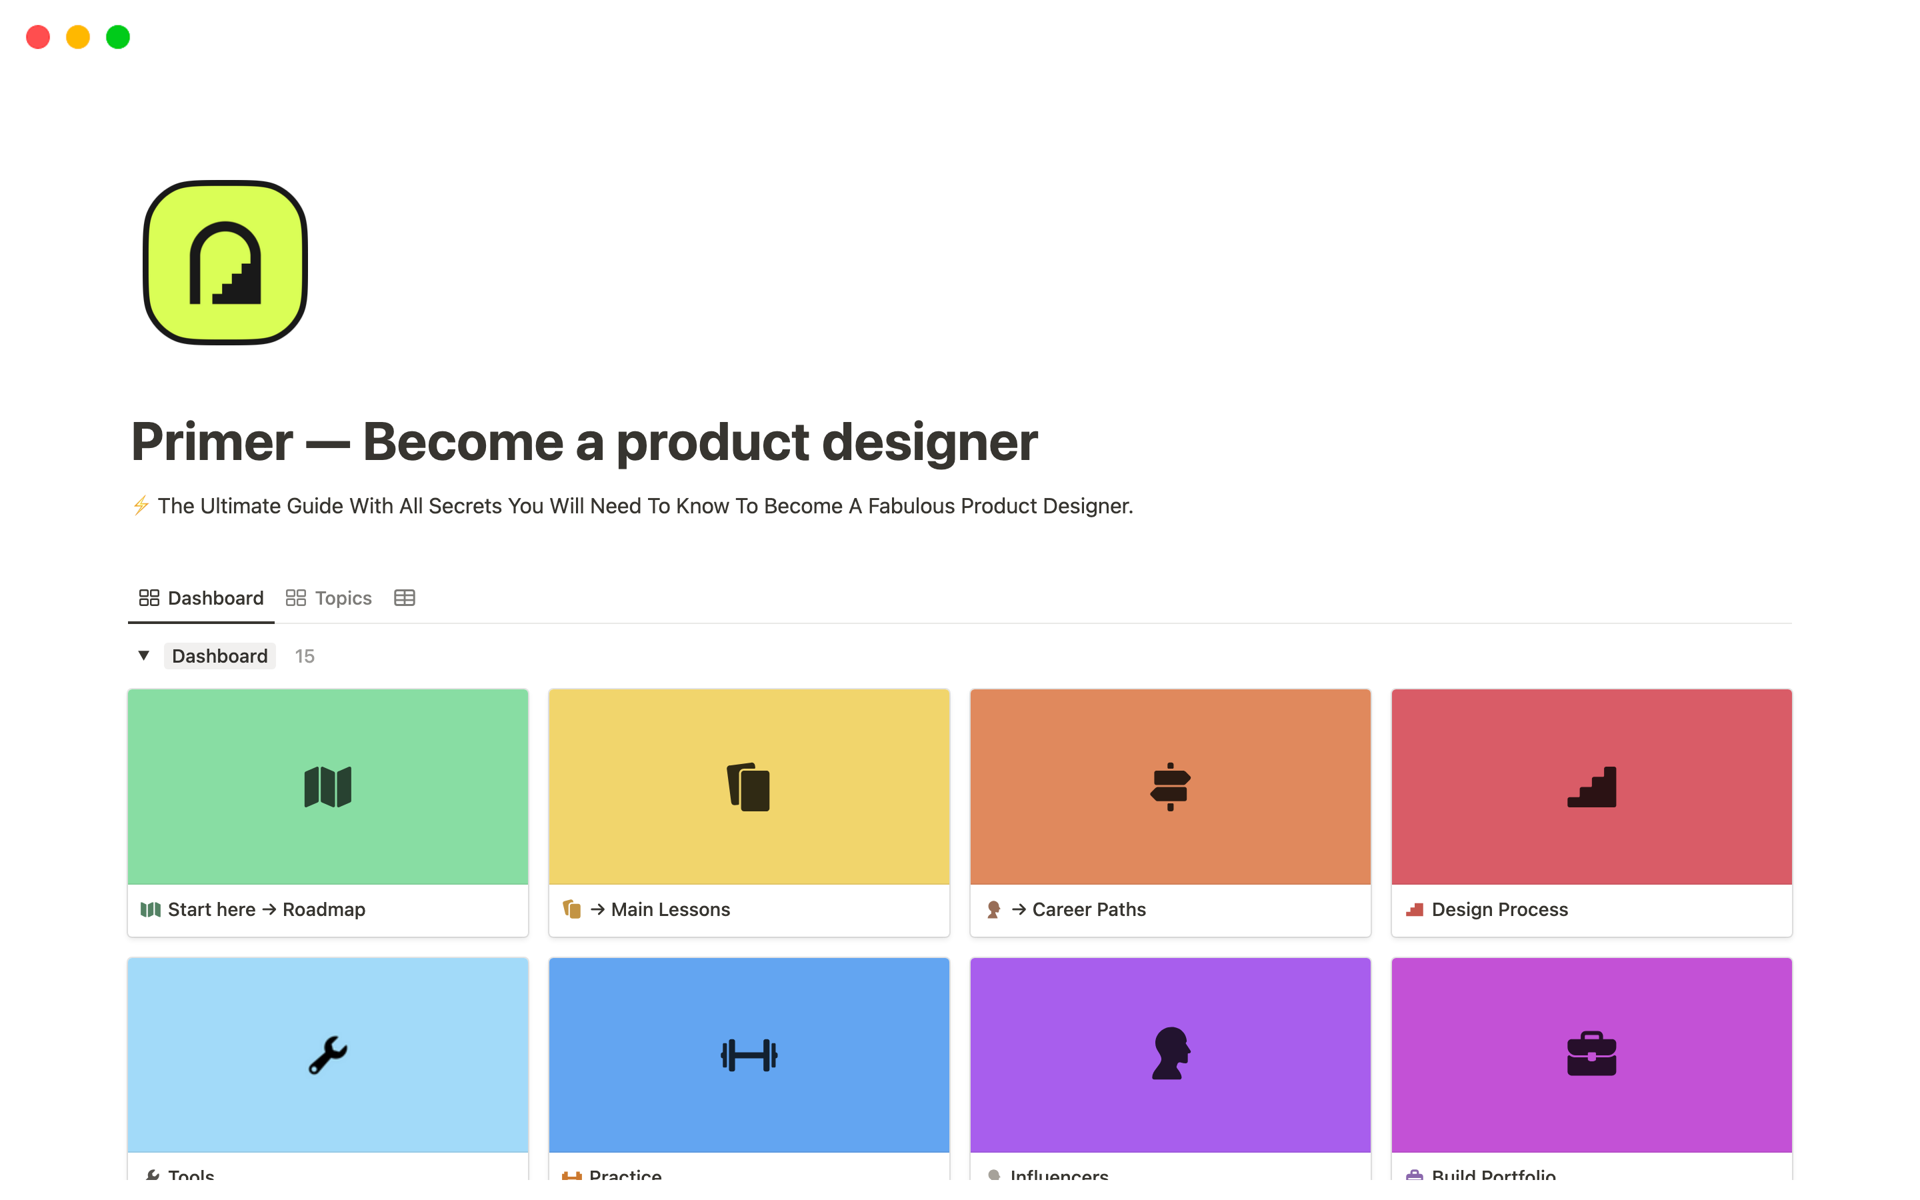 Primer is an ultimate self-paced bootcamp to become a digital product designer